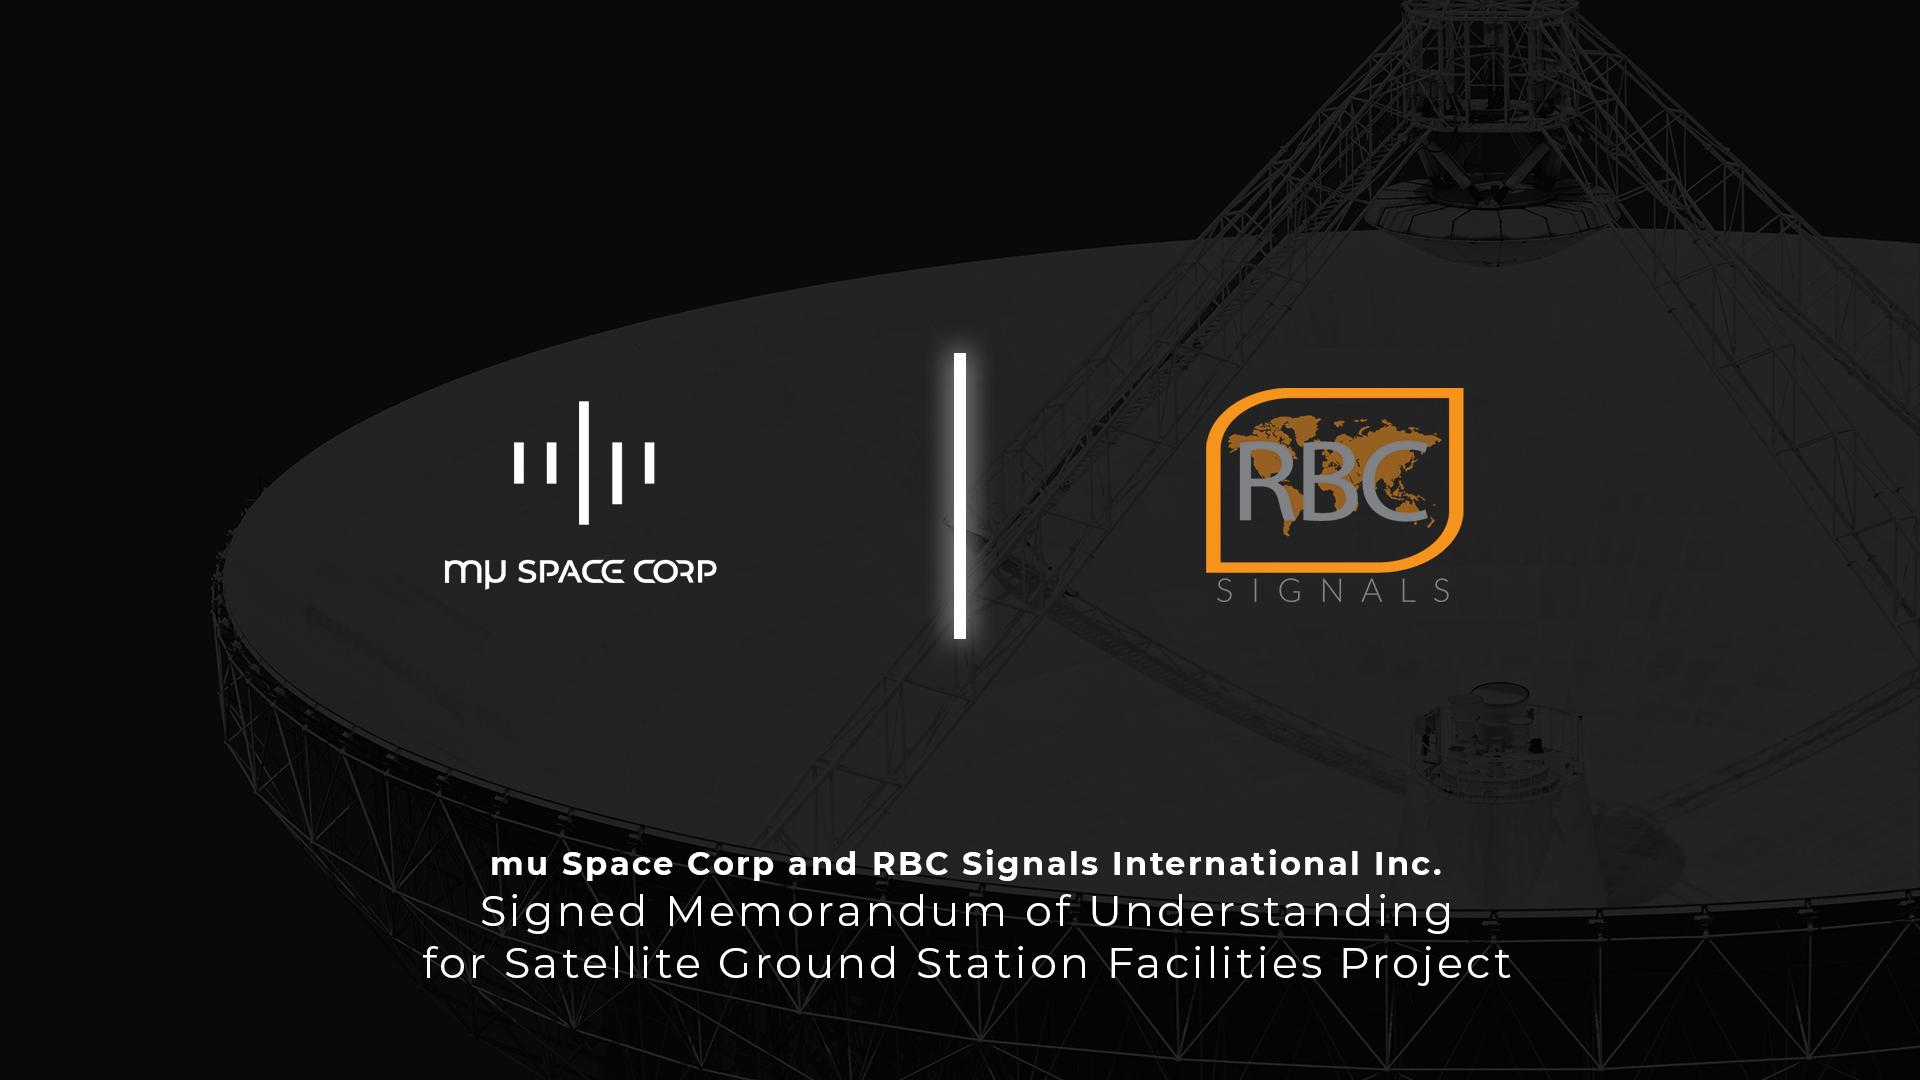 mu-space,-rbc-signals-sign-mou-for-satellite-project